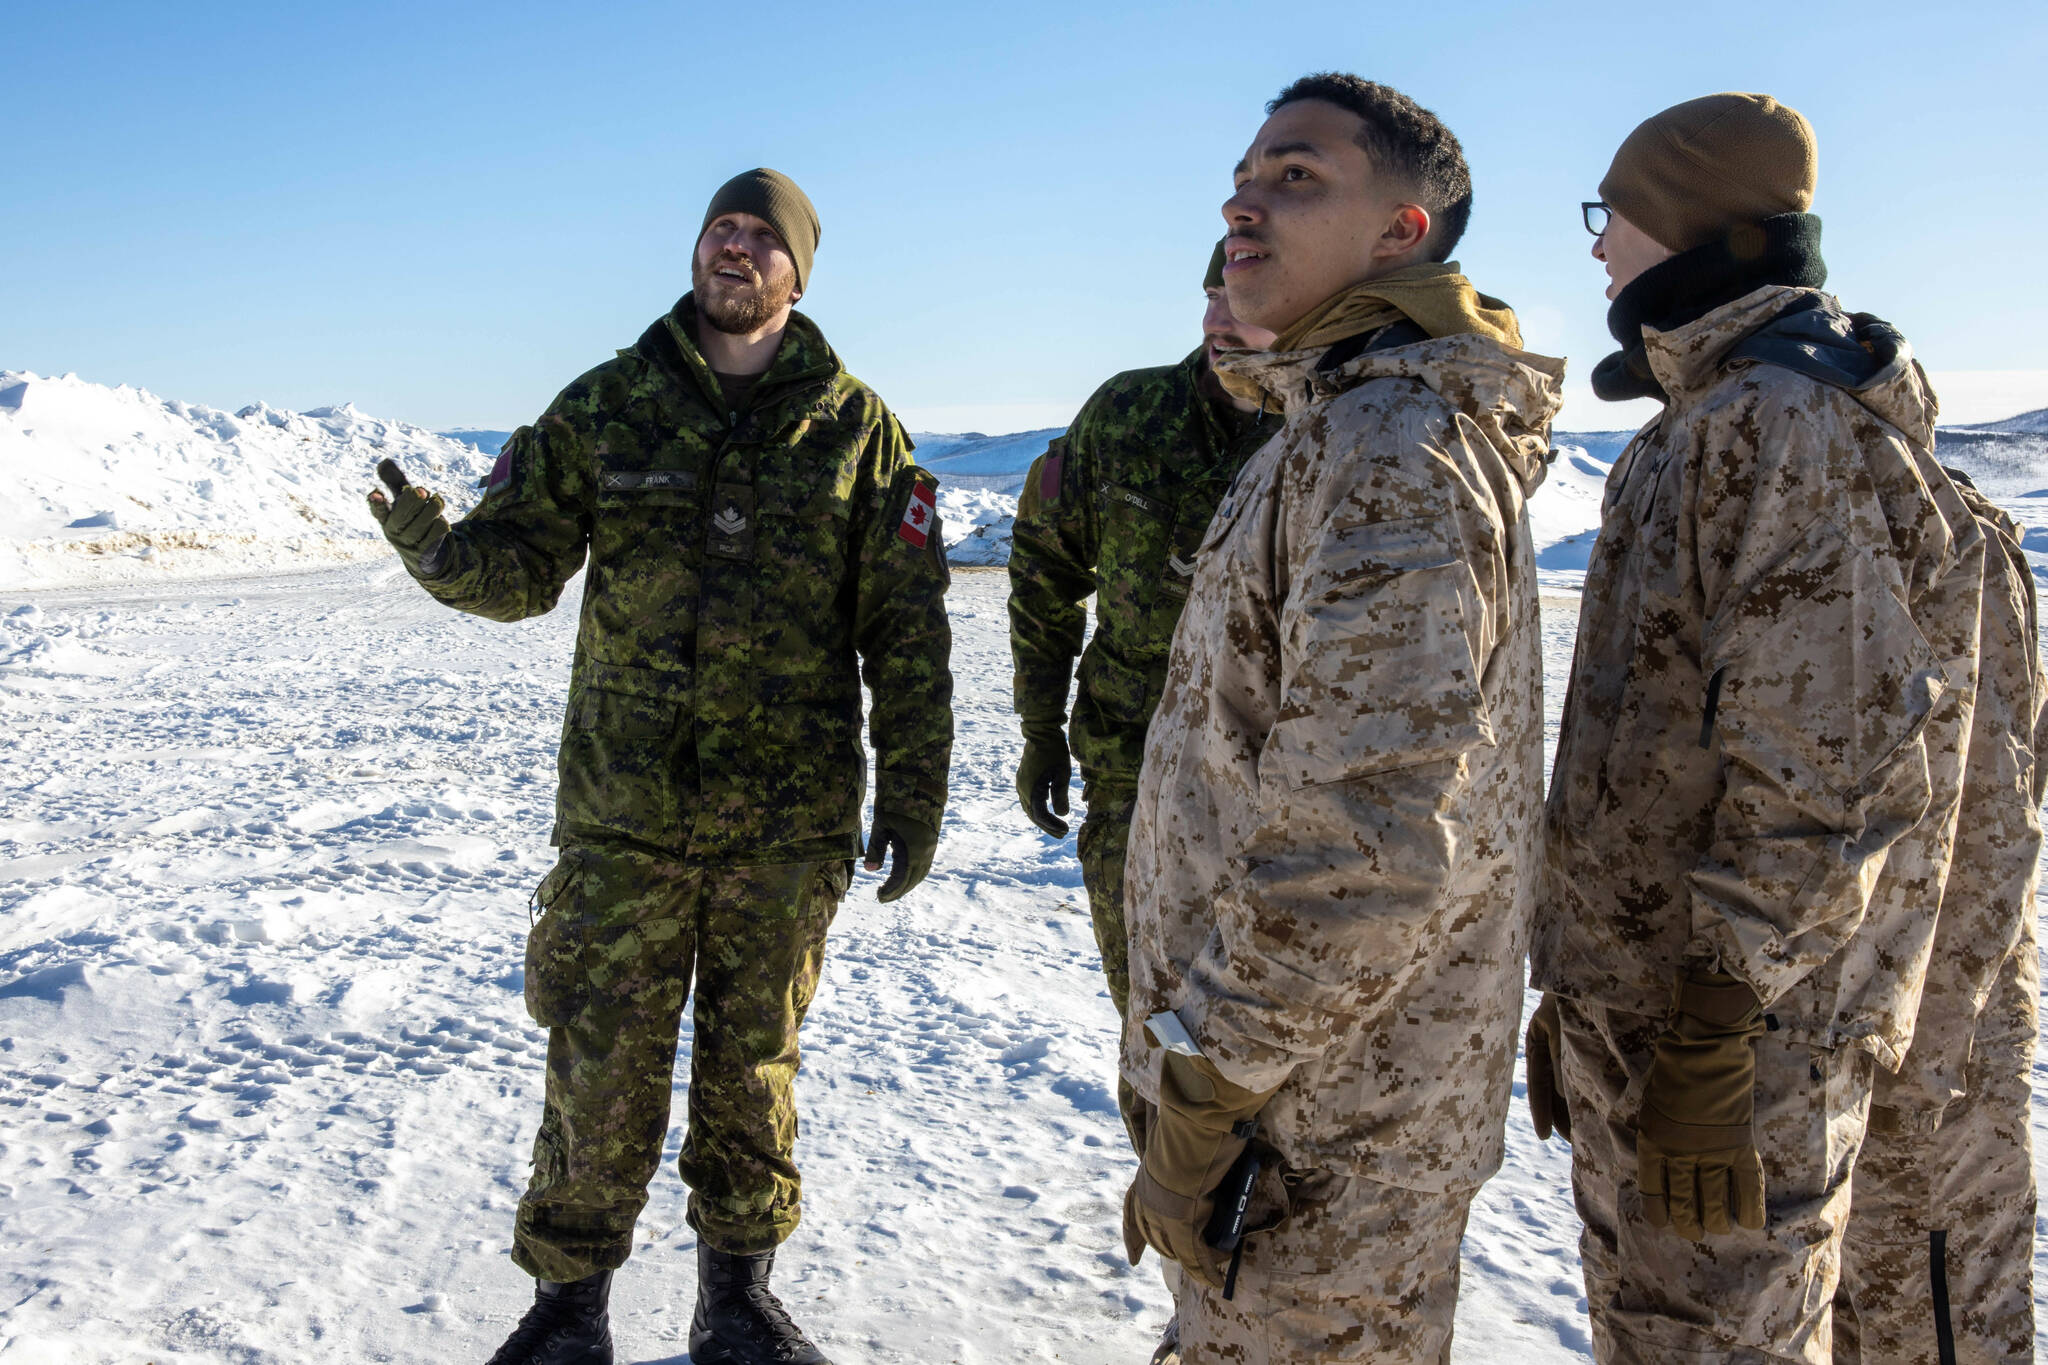 Canadian Army Master Bombardier Ian Frank, a radar detachment commander with 128 Battery, 4th Artillery Regiment, explains his unit’s operations in Exercise Arctic Edge 2022, to U.S. Marine Corps food specialists, with 2nd Landing Support Battalion, on Eielson Air Force Base, Alaska, March 15, 2022. (U.S. Marine Corps / Lance Cpl. Jessica J. Mazzamuto)